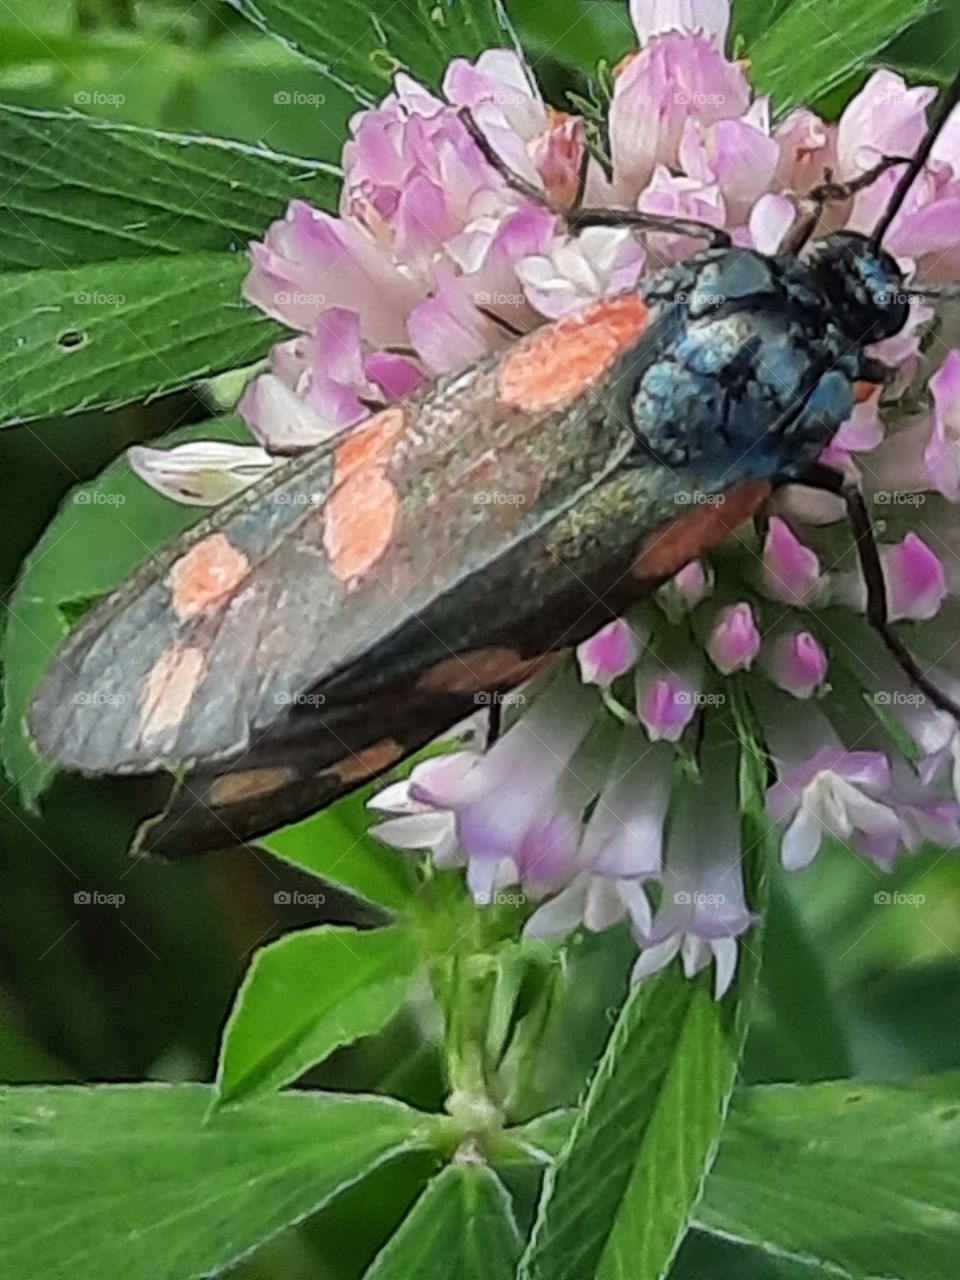 dotted large insect on a clover